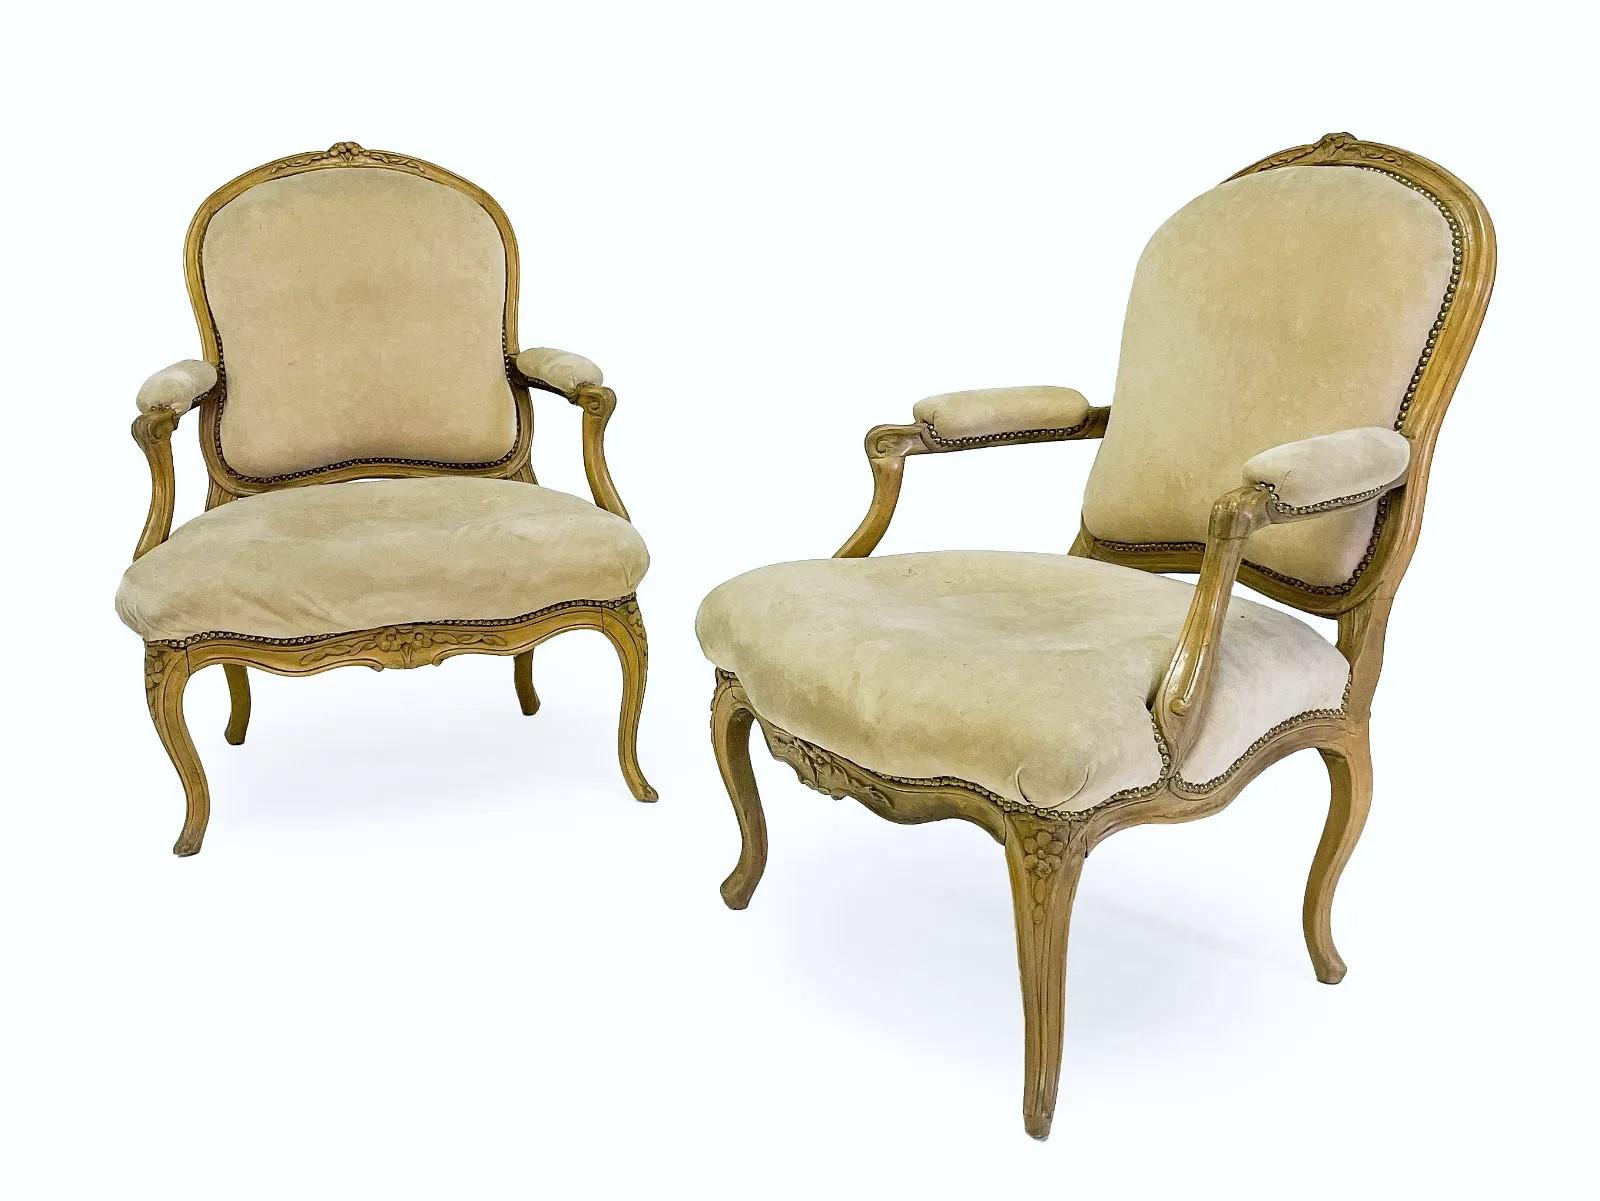 A fine larger-scale pair of Louis XV fauteuils in beech, backs and seats upholstered in tan fabric, the frames nicely carved with floral and other motifs, with cabriole legs scalloped apron.